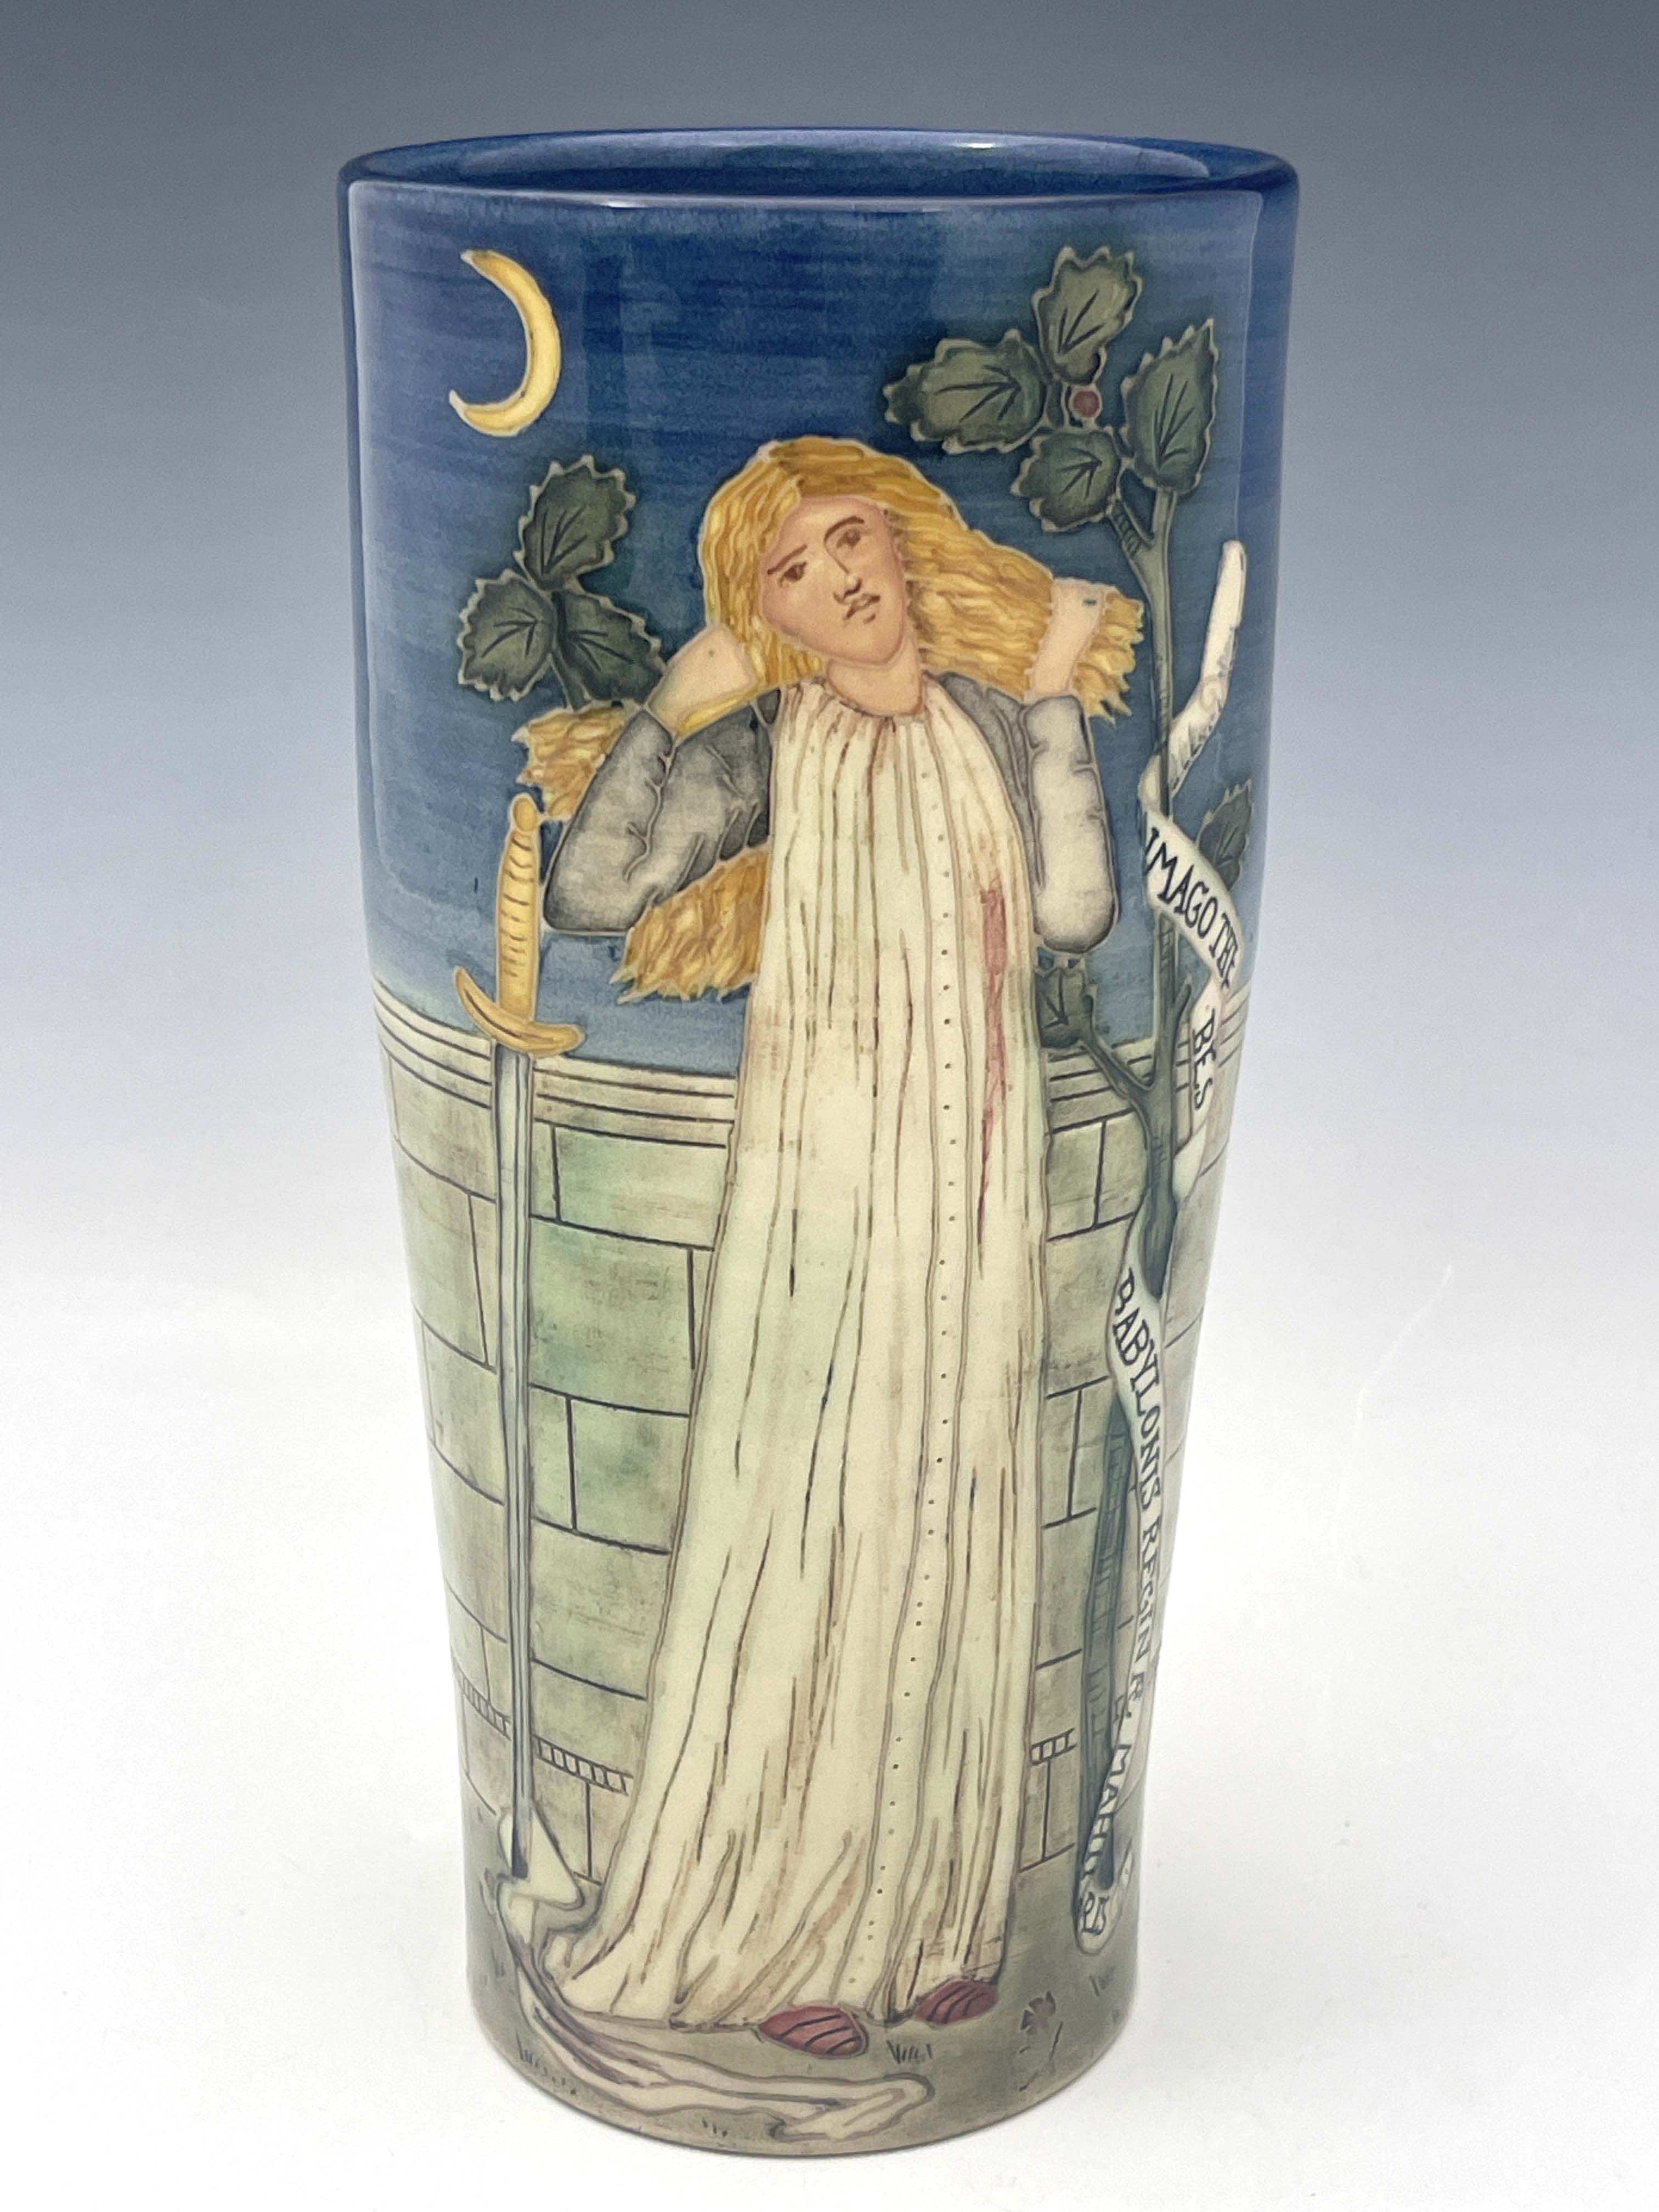 Sally Tuffin for Dennis Chinaworks, Shakespeare Thisbe vase after a design by William Morris - Image 5 of 5